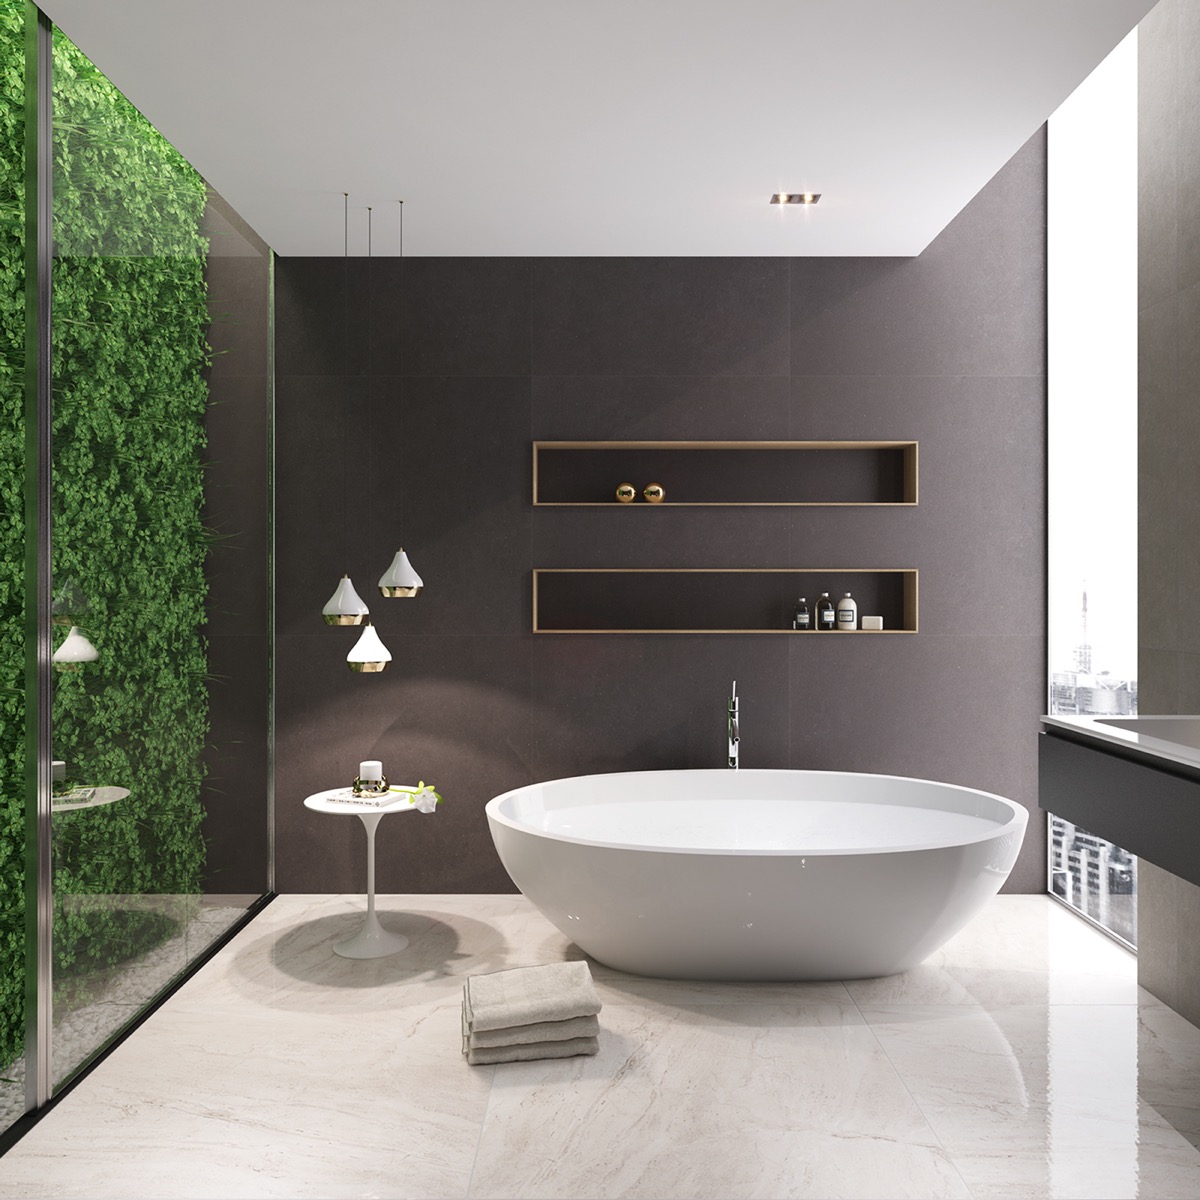 contemporary bathroom decor "width =" 1200 "height =" 1200 "srcset =" https://mileray.com/wp-content/uploads/2020/05/1588515574_53_The-Best-Tips-How-To-Arranged-Modern-Small-Bathroom-Designs.jpg 1200w, https: // myfashionos. com / wp-content / uploads / 2016/10 / Mitaka-Dimov-1-150x150.jpg 150w, https://mileray.com/wp-content/uploads/2016/10/Mitaka-Dimov-1-300x300.jpg 300w, https://mileray.com/wp-content/uploads/2016/10/Mitaka-Dimov-1-768x768.jpg 768w, https://mileray.com/wp-content/uploads/2016/10/Mitaka -Dimov-1-1024x1024.jpg 1024w, https://mileray.com/wp-content/uploads/2016/10/Mitaka-Dimov-1-696x696.jpg 696w, https://mileray.com/wp-content /uploads/2016/10/Mitaka-Dimov-1-1068x1068.jpg 1068w, https://mileray.com/wp-content/uploads/2016/10/Mitaka-Dimov-1-420x420.jpg 420w "sizes =" (maximum width: 1200px) 100vw, 1200px